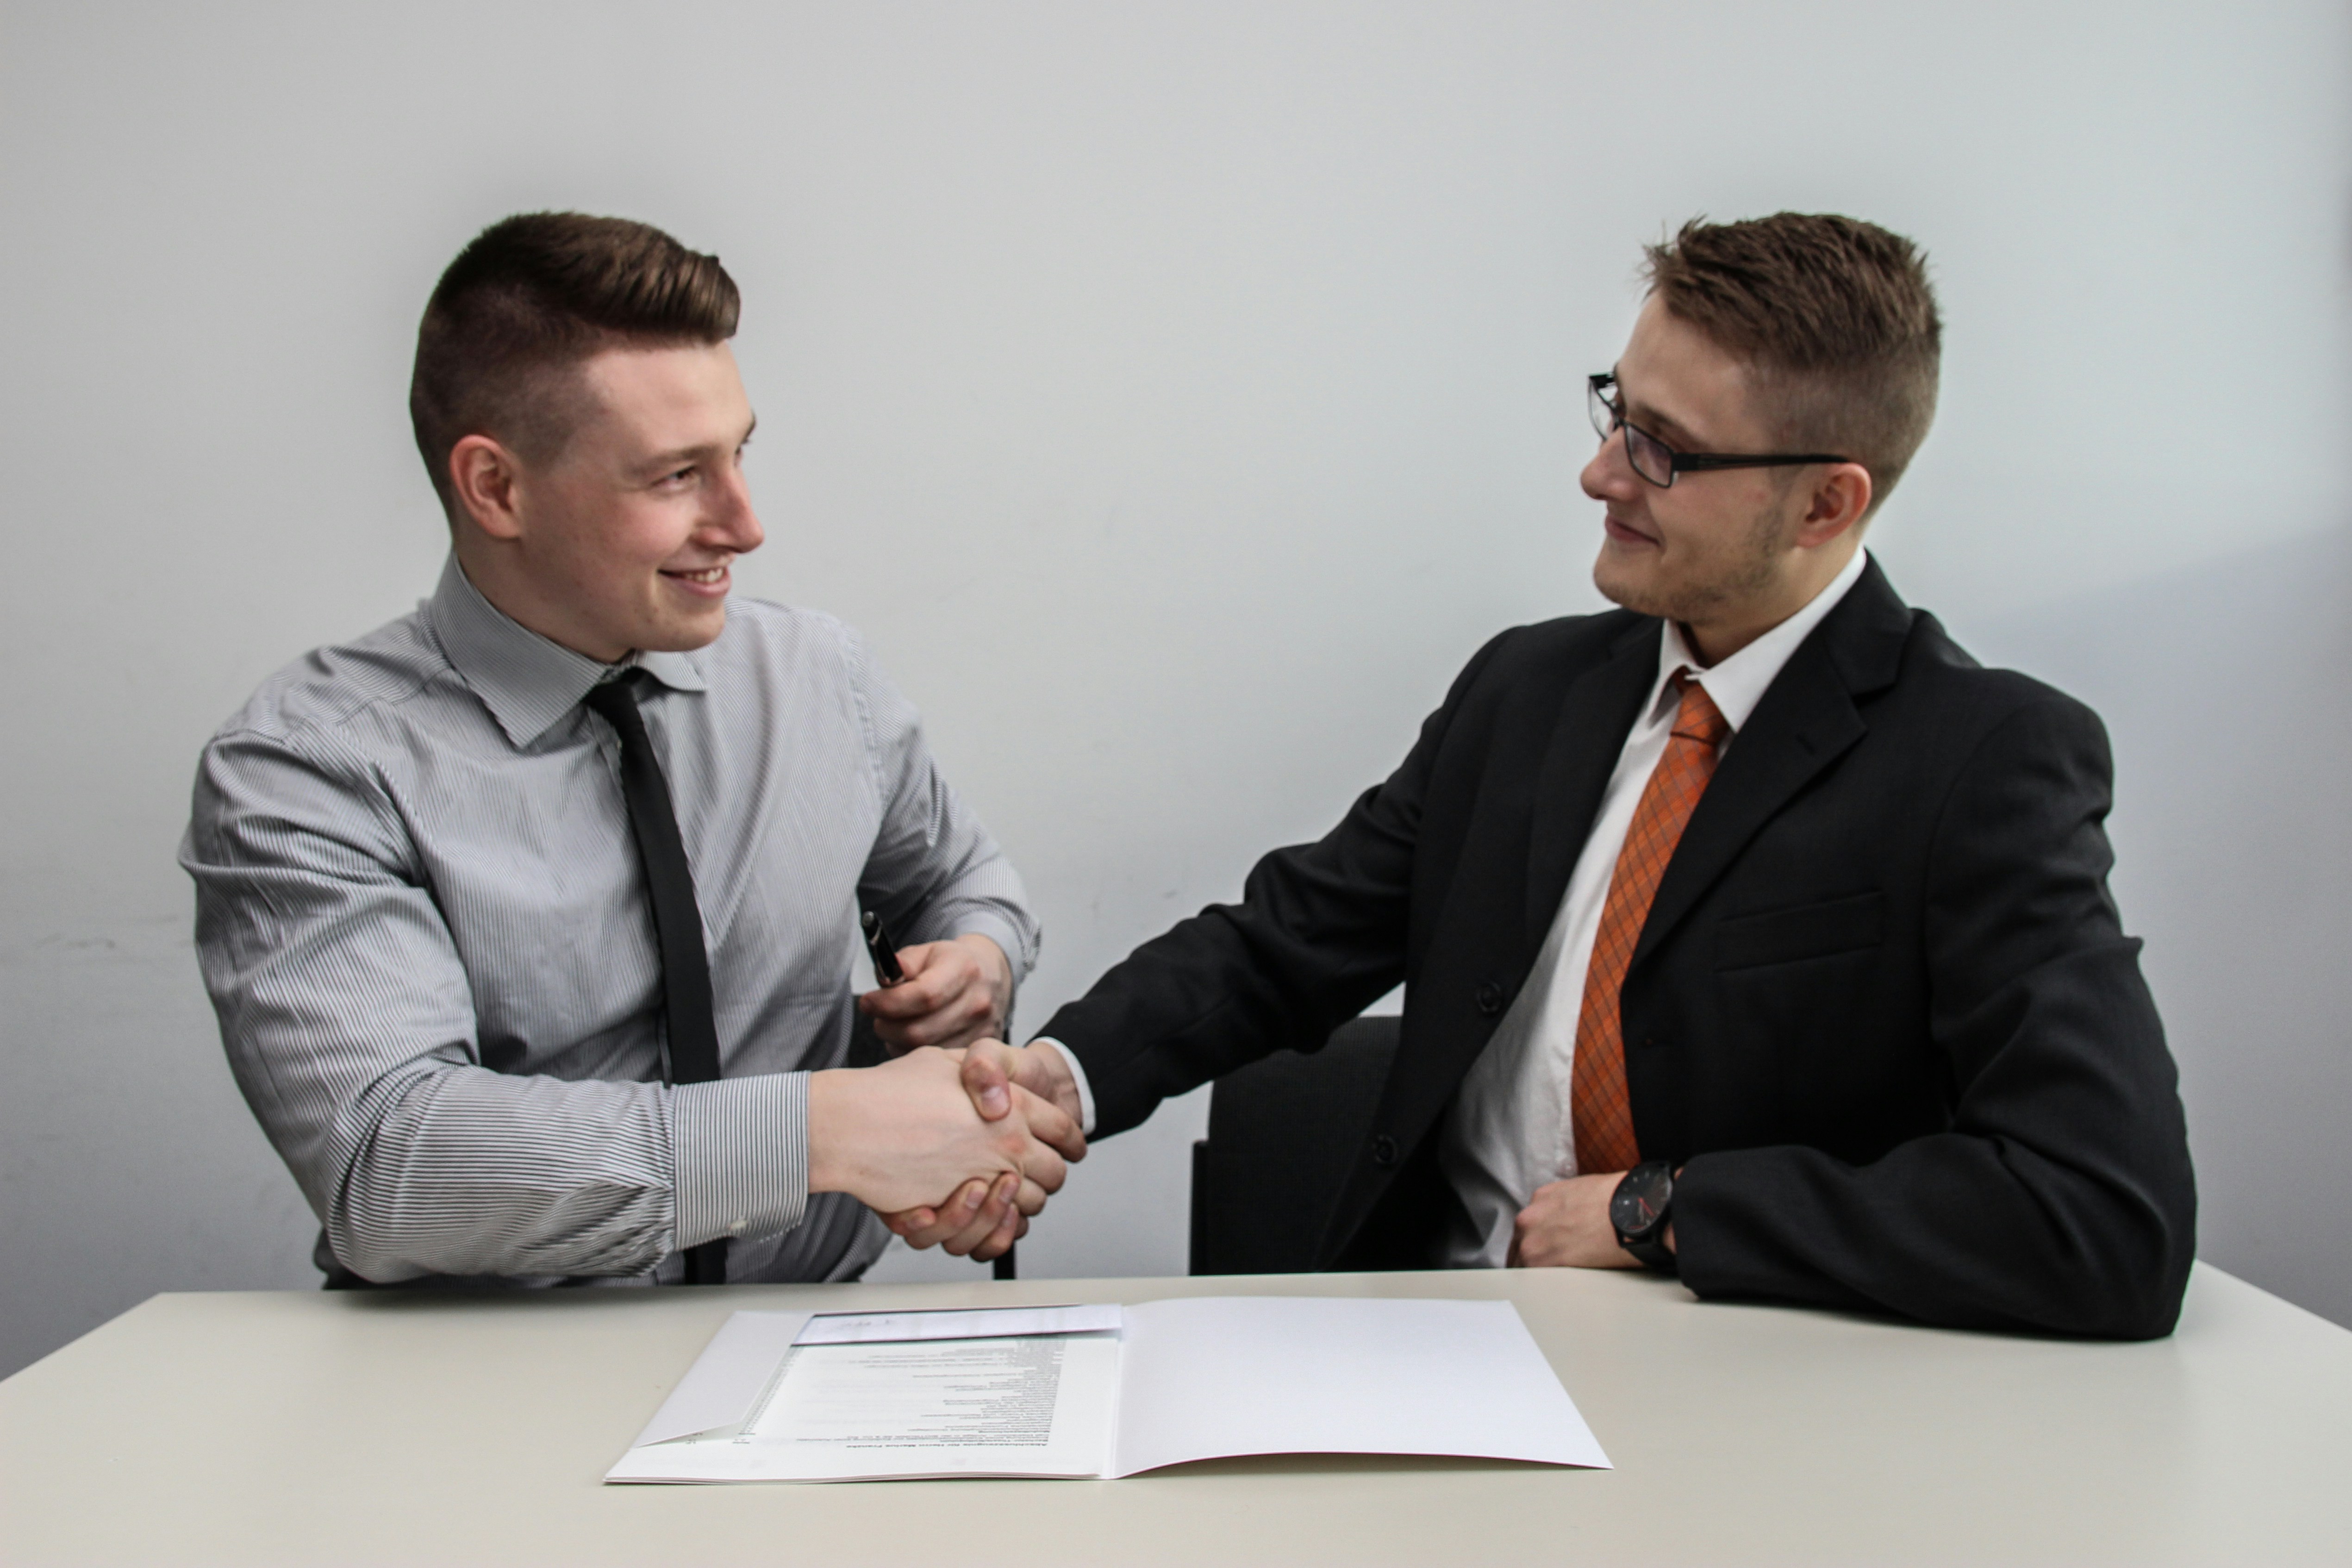 Preparing Non-Compete &amp; Non-Solicitation Agreements for Your Employees